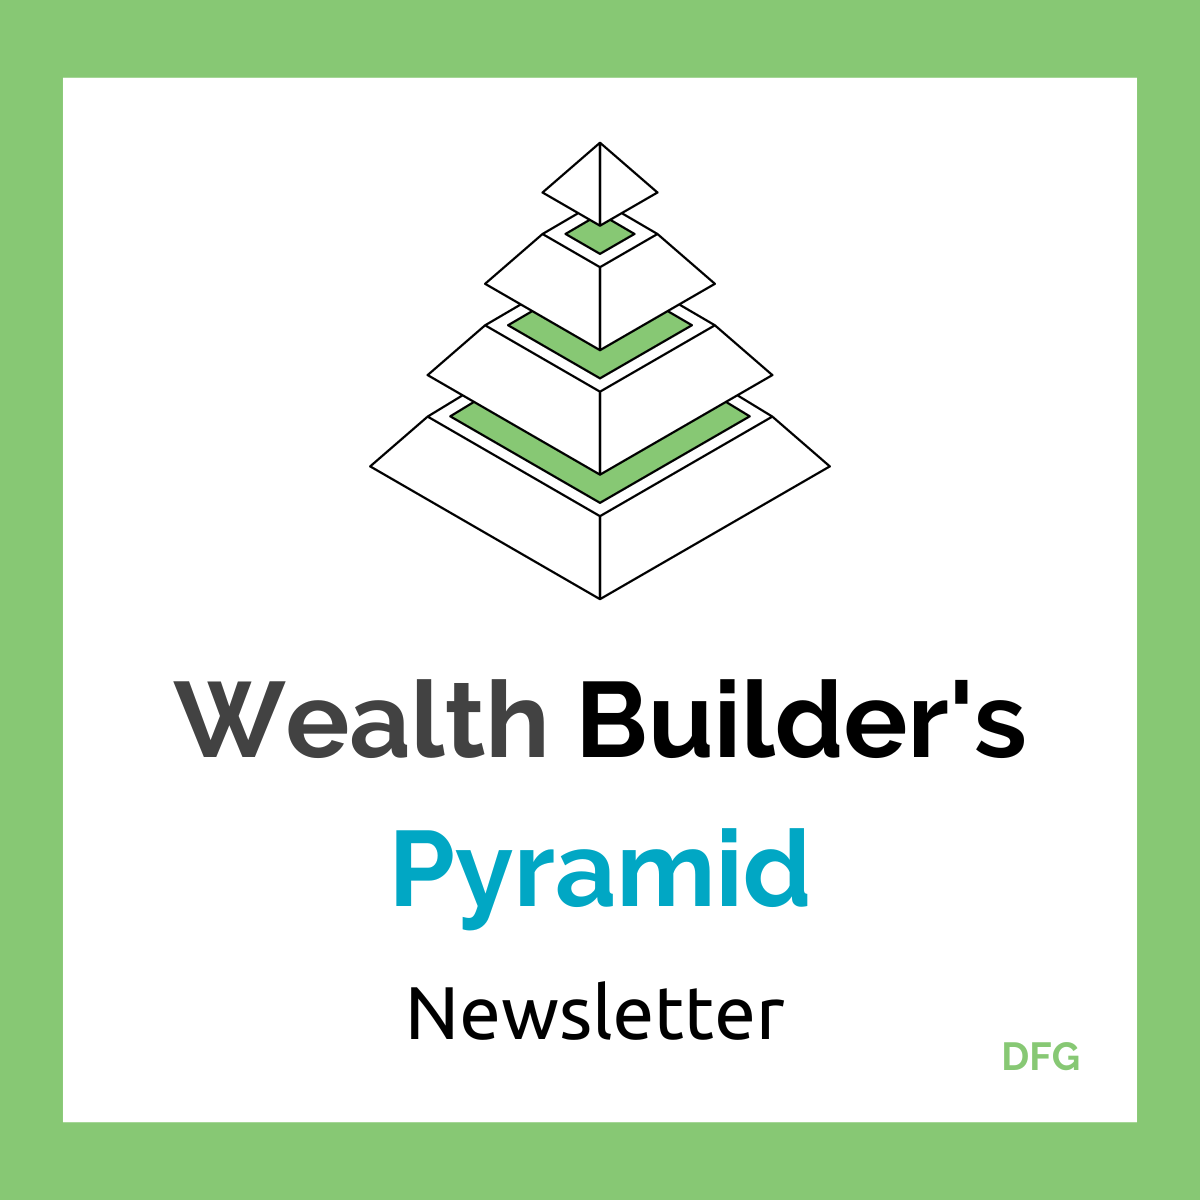 The Wealth Pyramid Newsletter